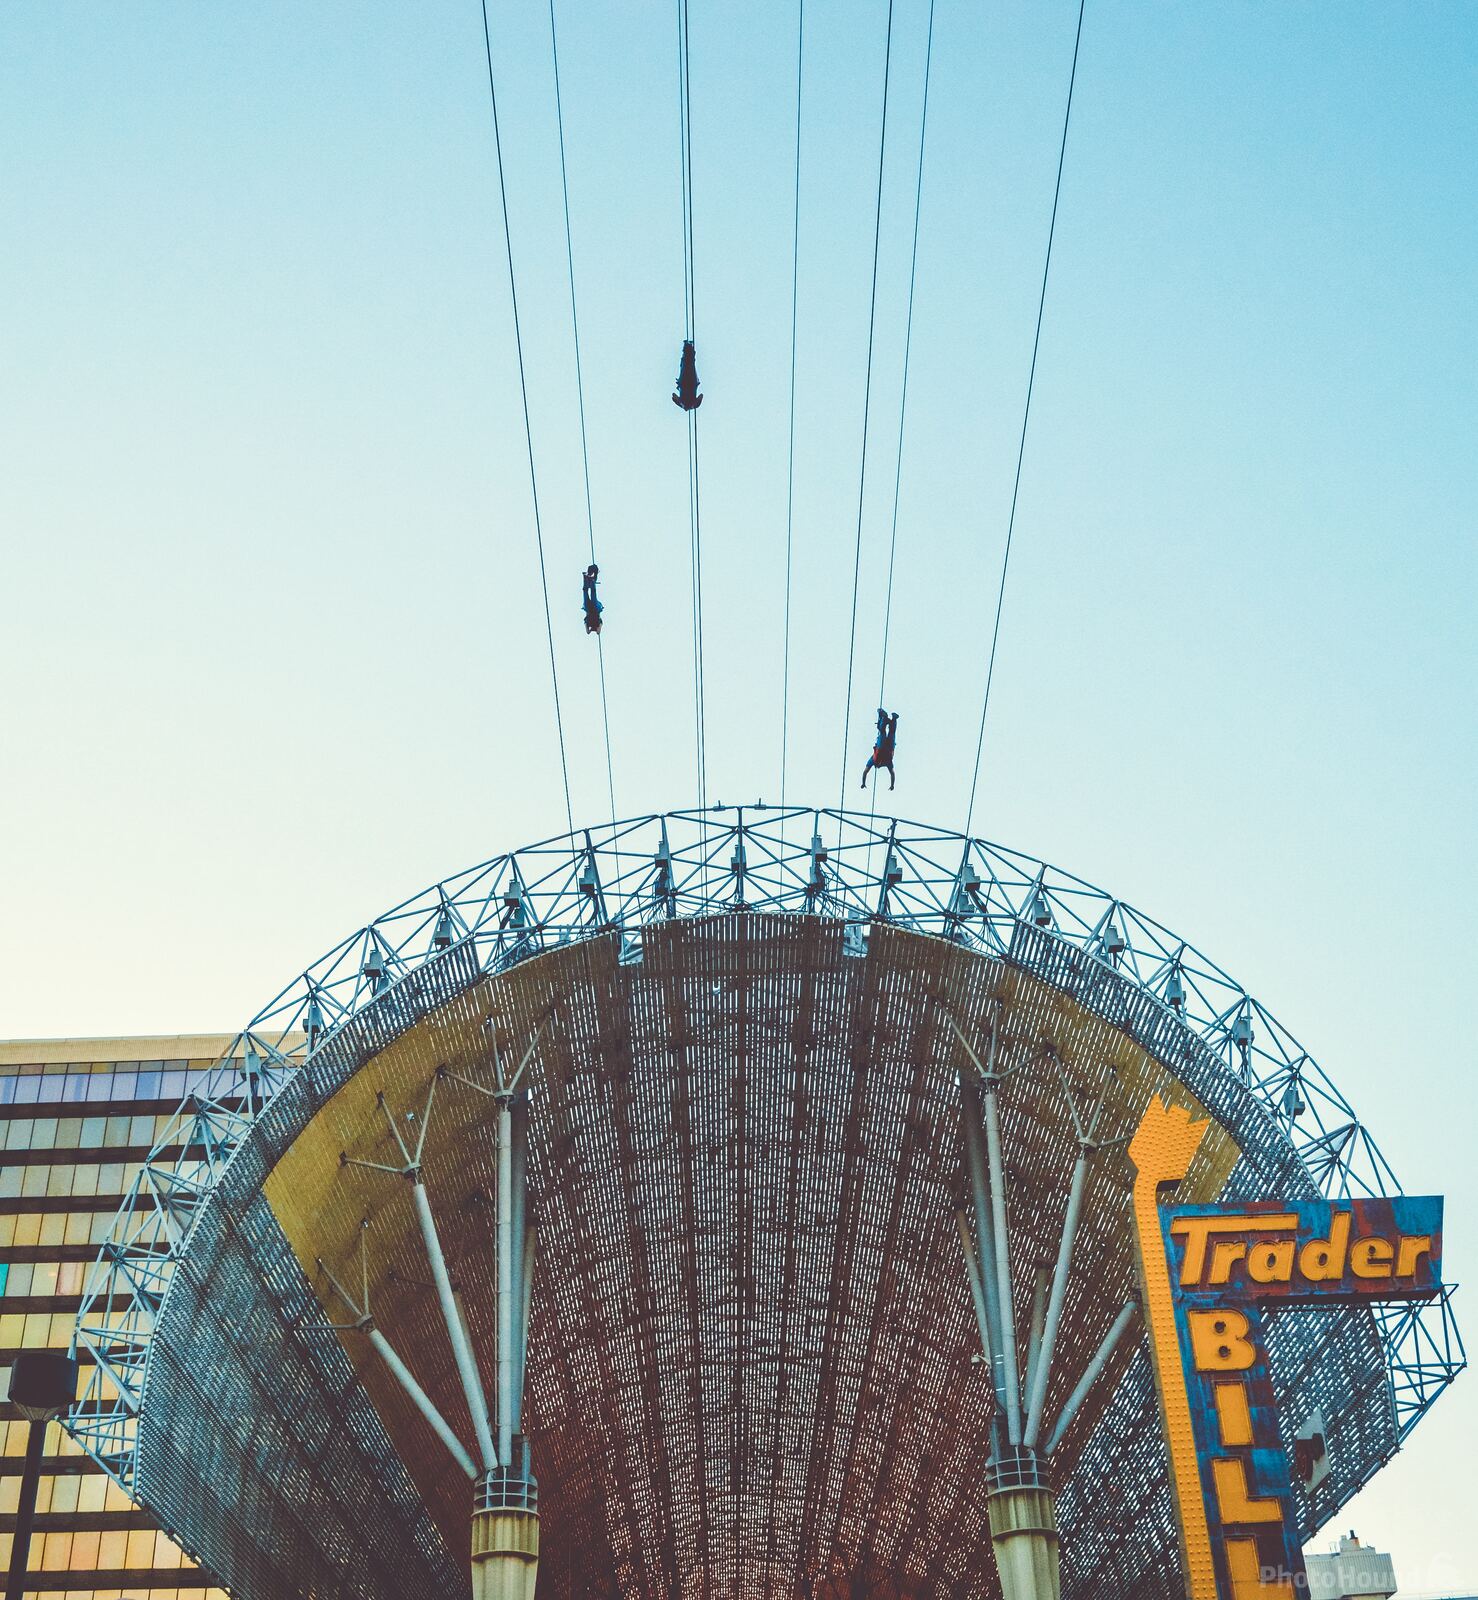 Image of Fremont Street Experience by Team PhotoHound